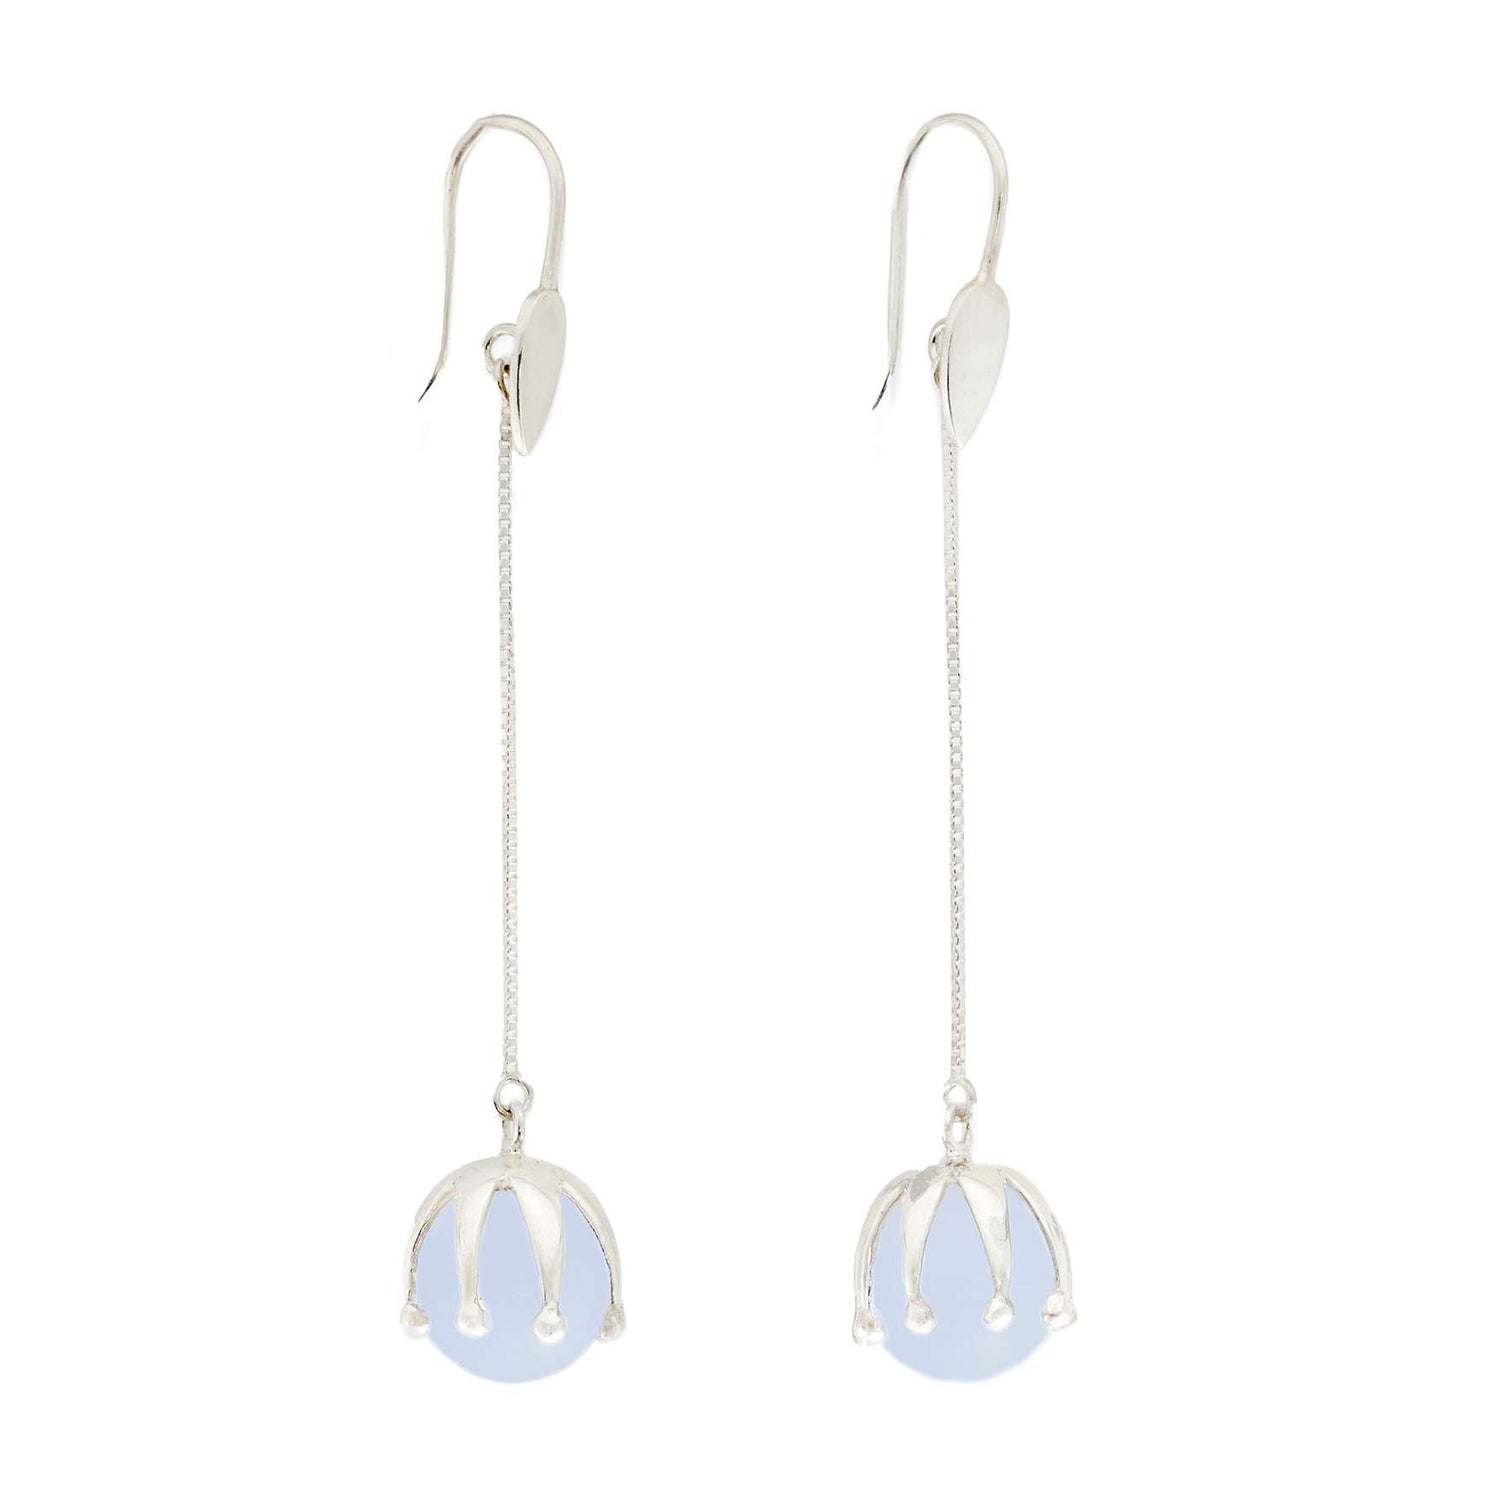 Demanding Attention: Stand Out with Queen Chalcedony Earhooks